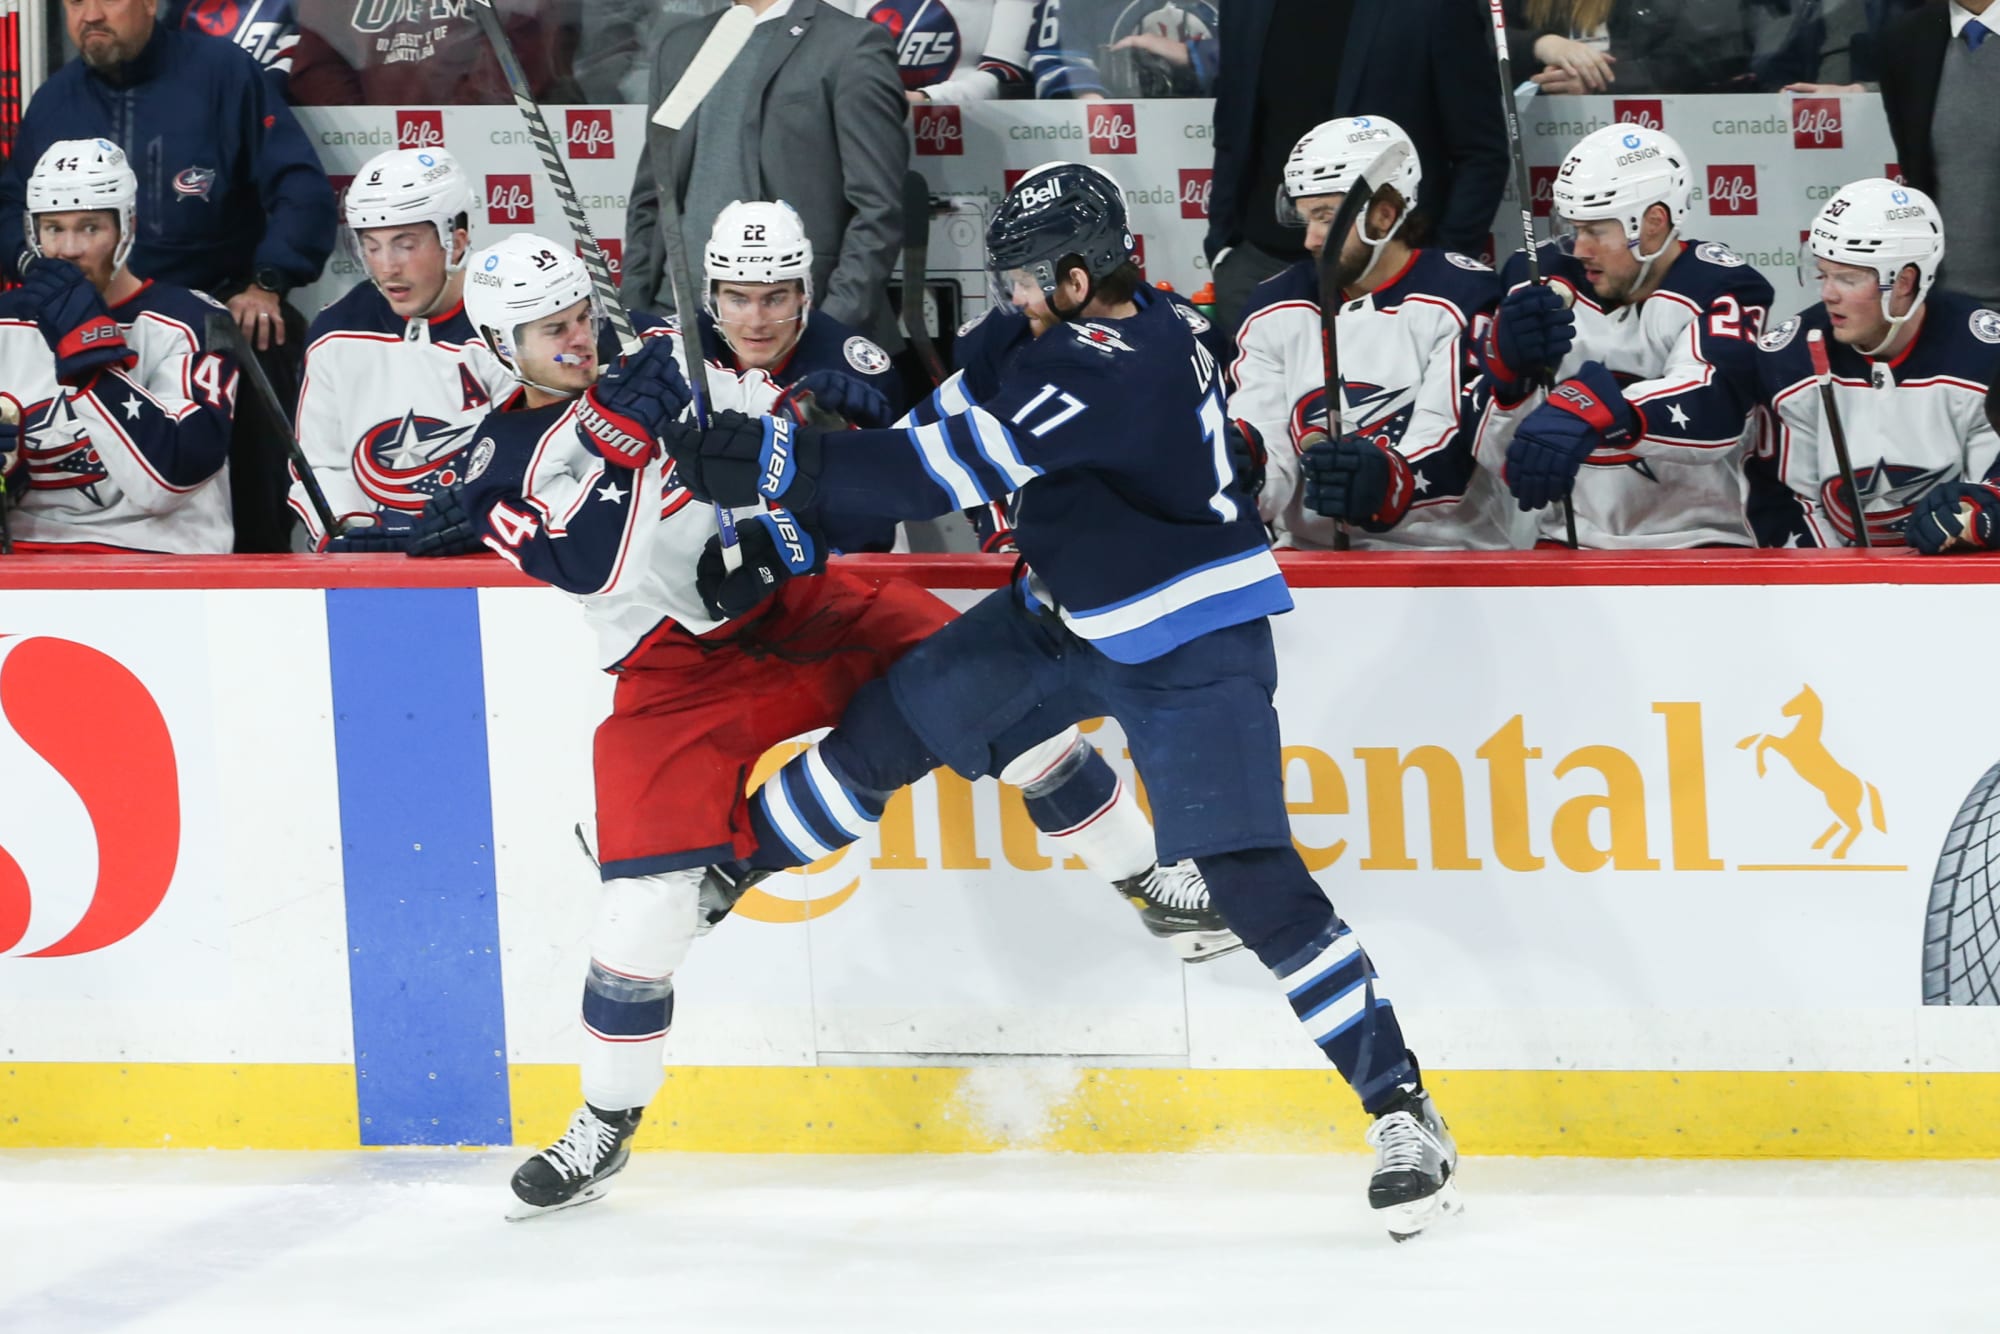 Winnipeg Jets vs Blue Jackets Preview: Jets Look for 4 Straight Wins